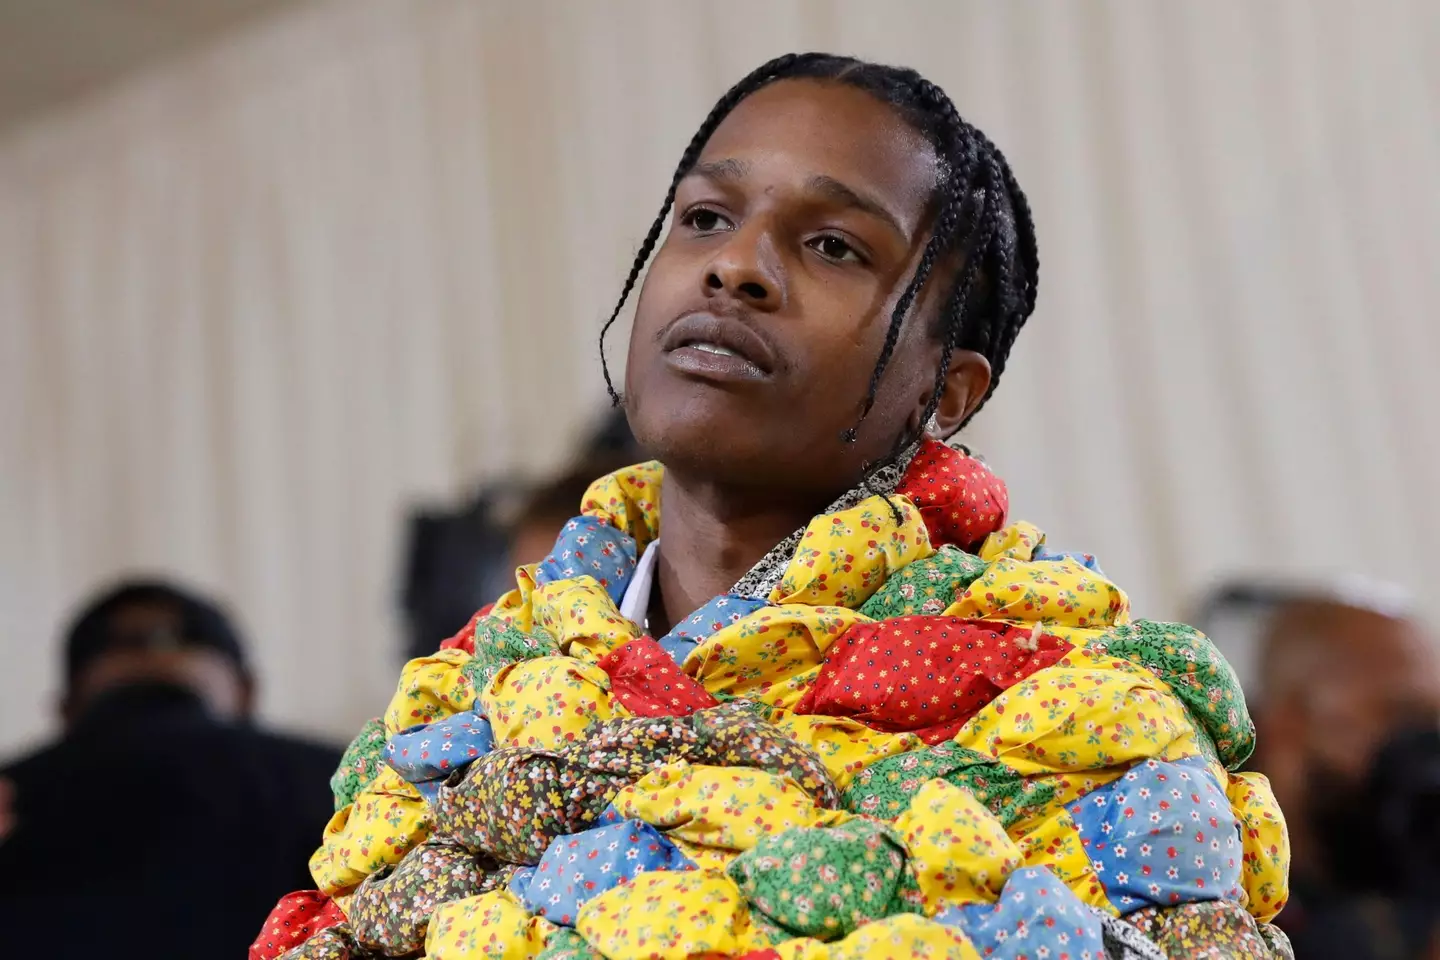 ASAP Rocky was arrested at Los Angeles International Airport.